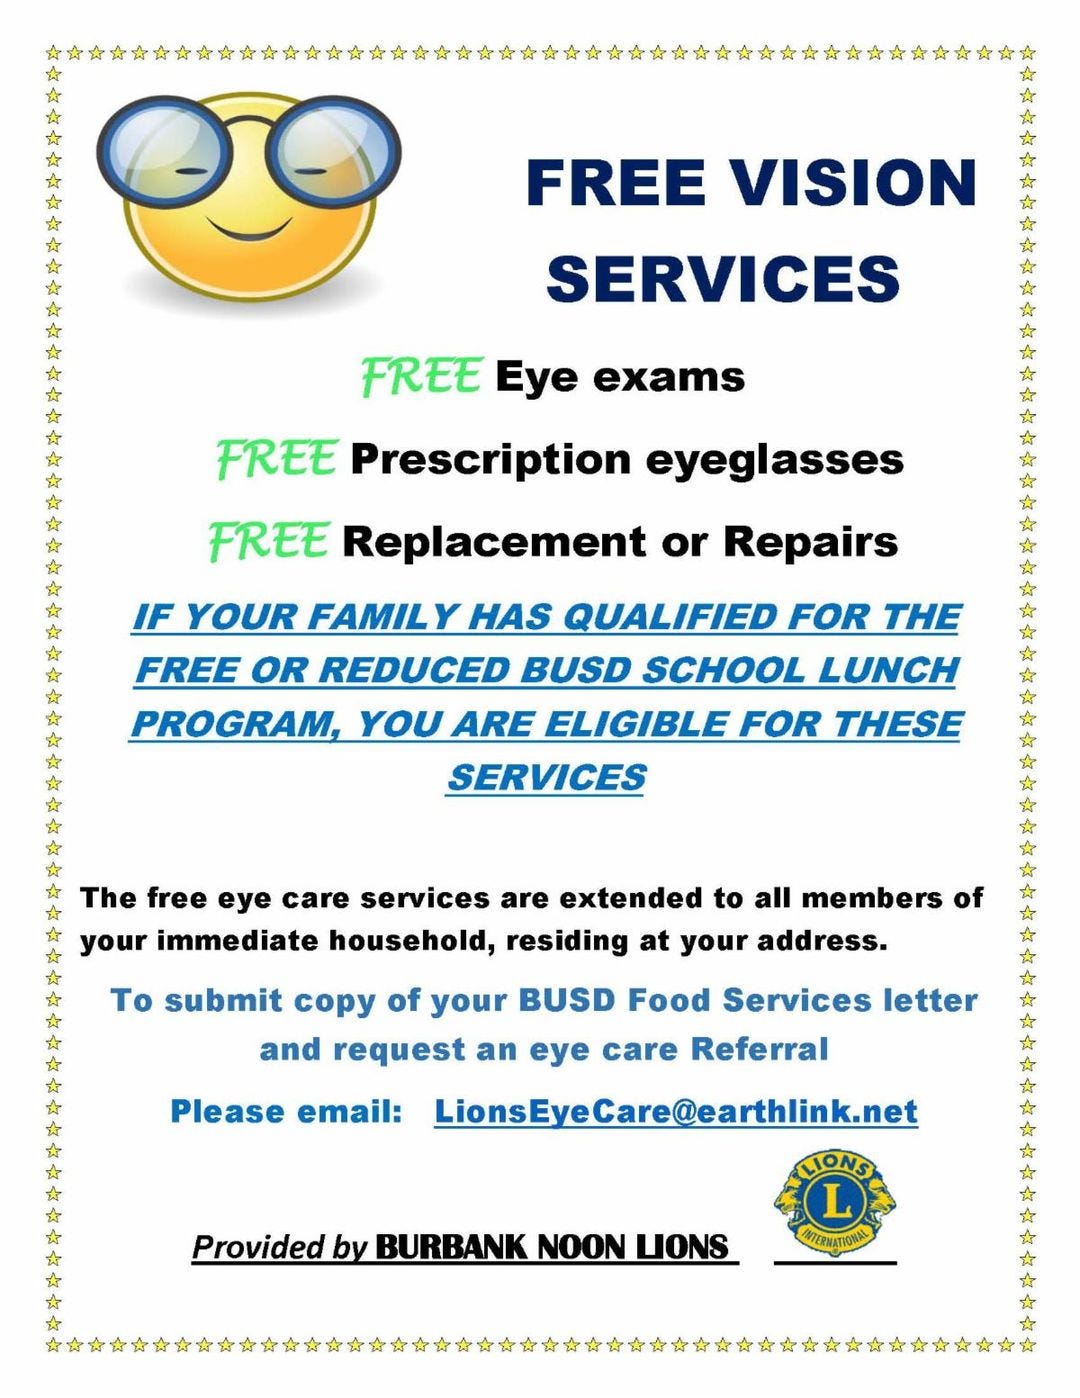 May be an image of text that says 'FREE VISION SERVICES FREE Eye exams * FREE Prescription eyeglasses * FREE Replacement or Repairs IF YOUR FAMILY HAS QUALIFIED FOR THE FREE OR REDUCED BUSD SCHOOL LUNCH PROGRAM, YOU ARE ELIGIBLE FOR THESE SERVICES * The free eye care services are extended to all members of your immediate household, residing at your address. * * Το submit copy of your BUSD Food Services letter and request an eye care Referral LionsEveCare@earthlink.net * Please email: Provided by BURBANK NOON LIONS TERNATIONA'